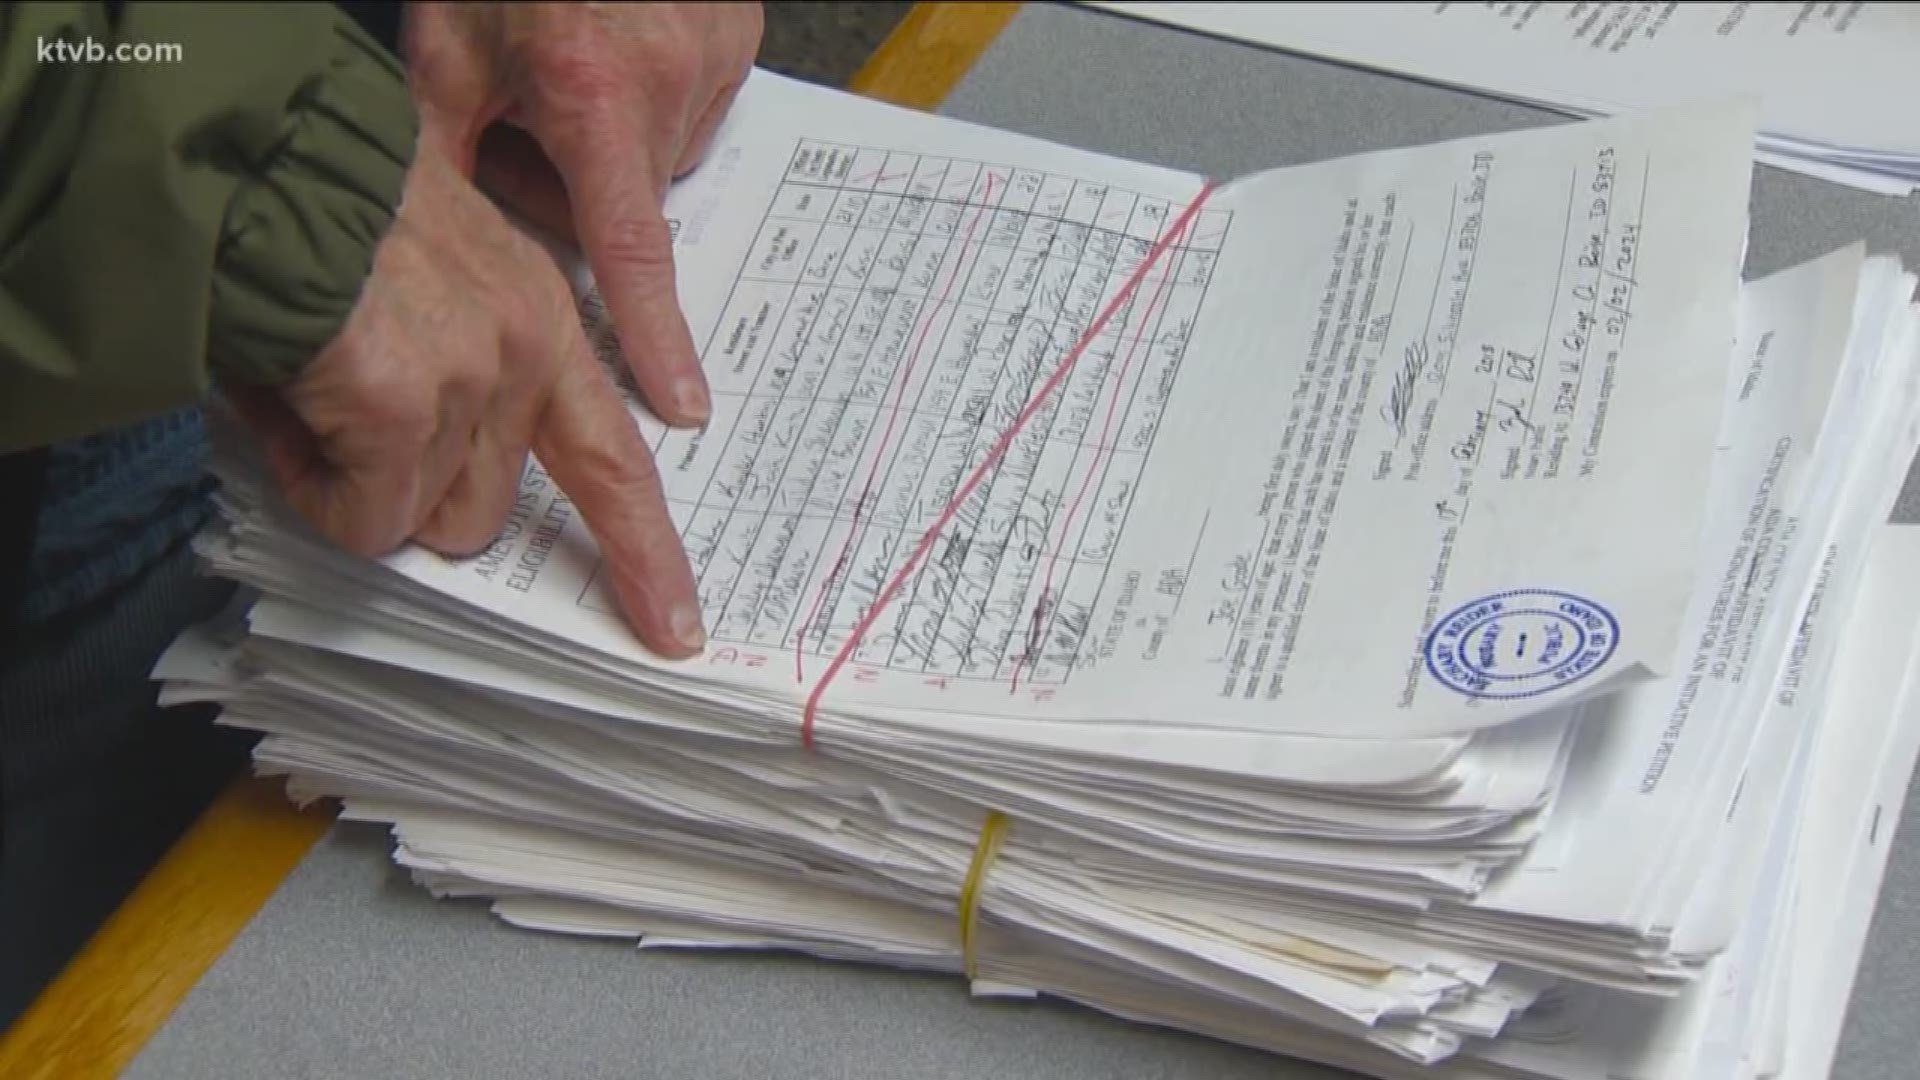 Medicaid for Idaho says they have gathered half of the signatures needed to put the measure on the November ballot. 